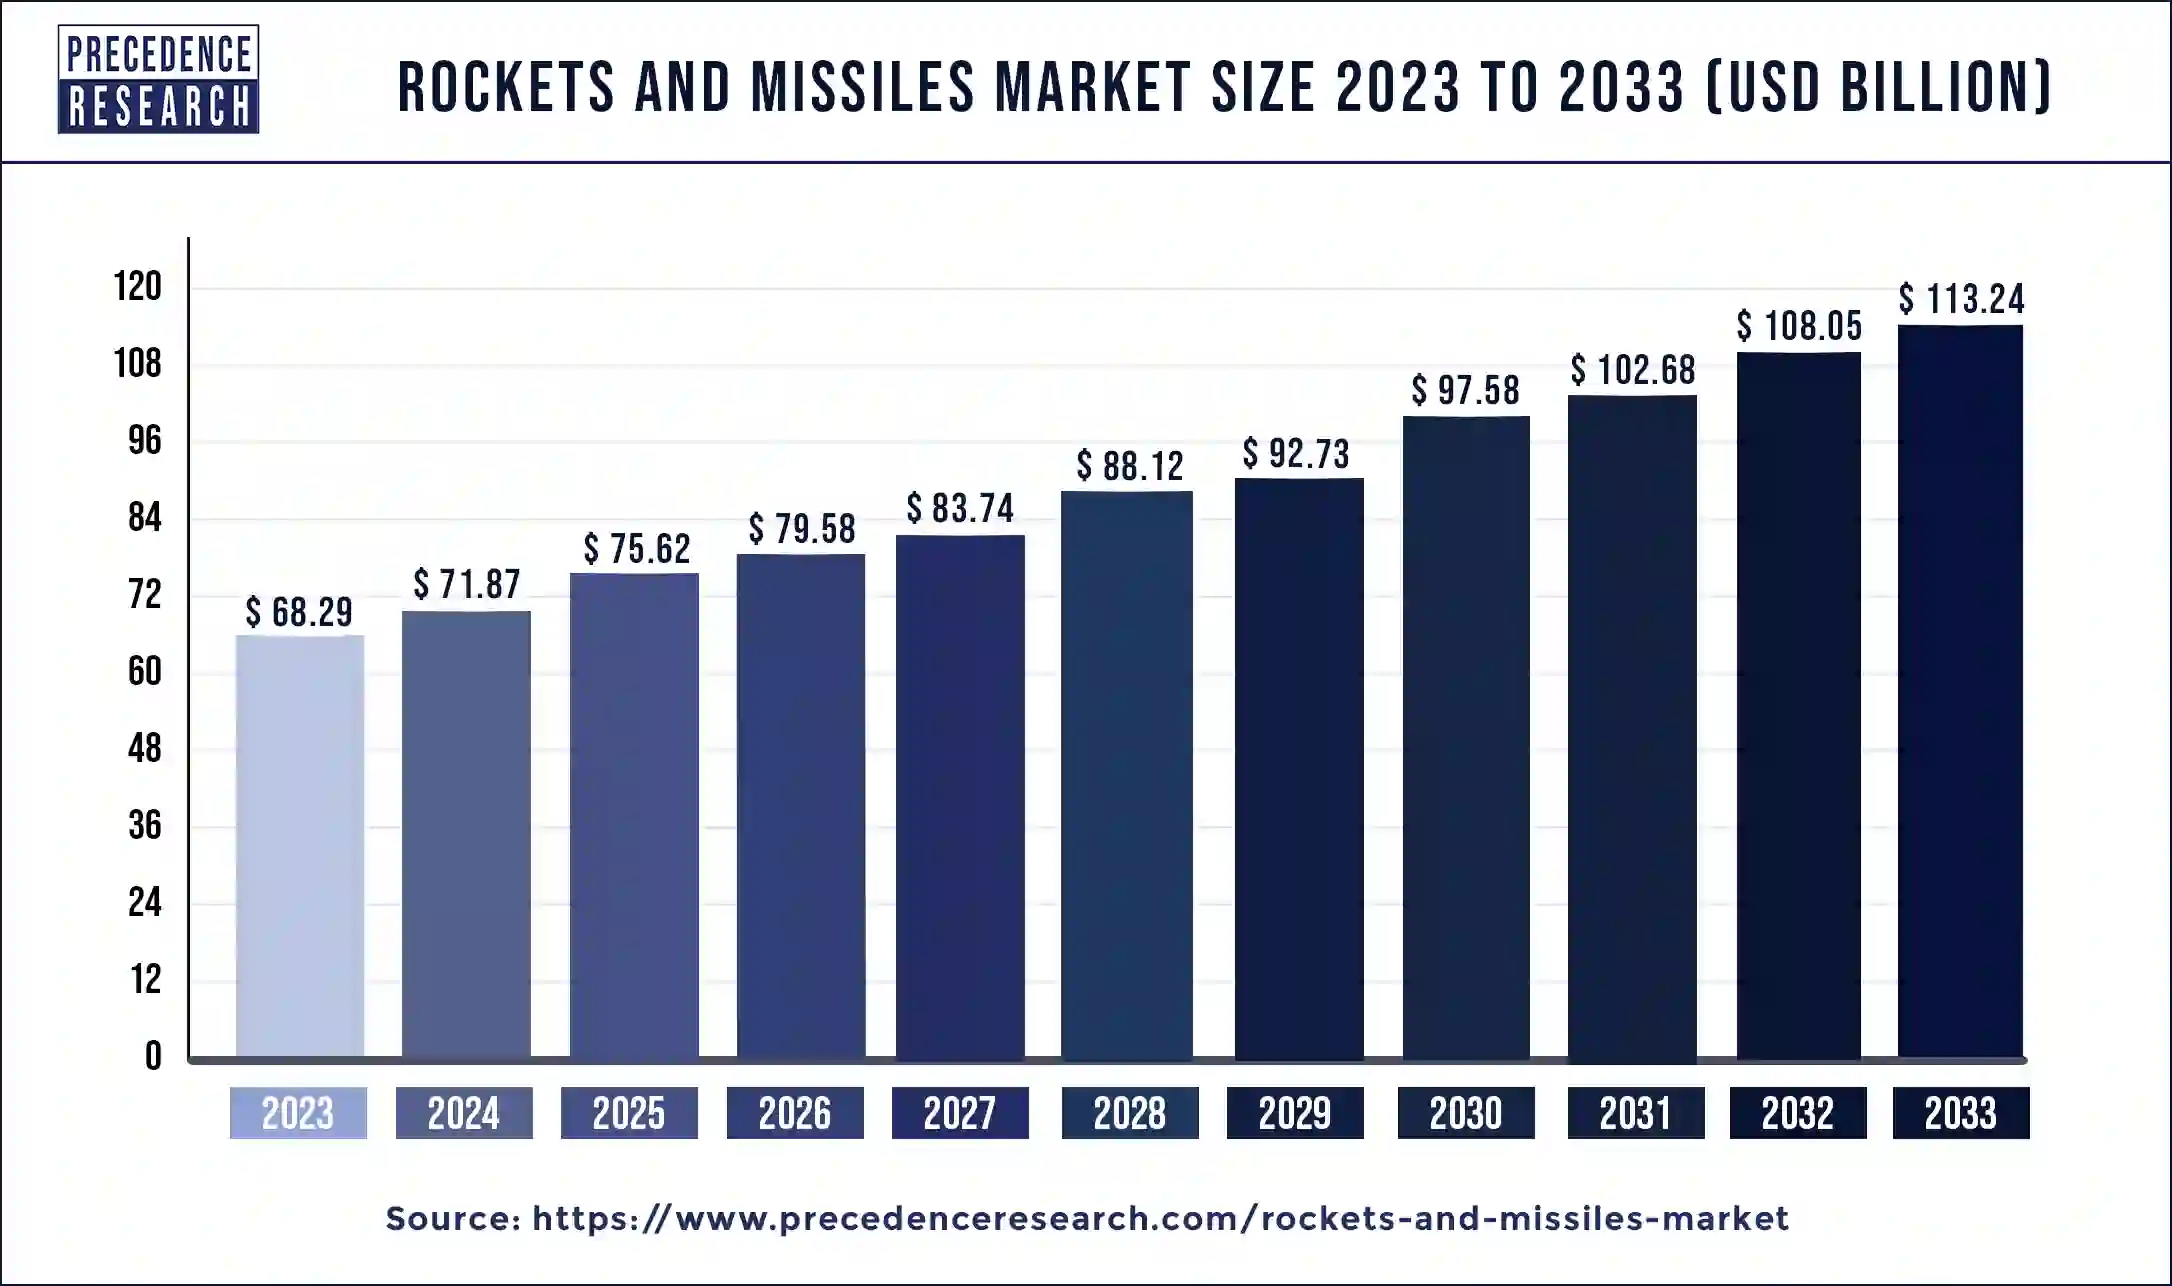 Rockets and Missiles Market Size 2024 to 2033